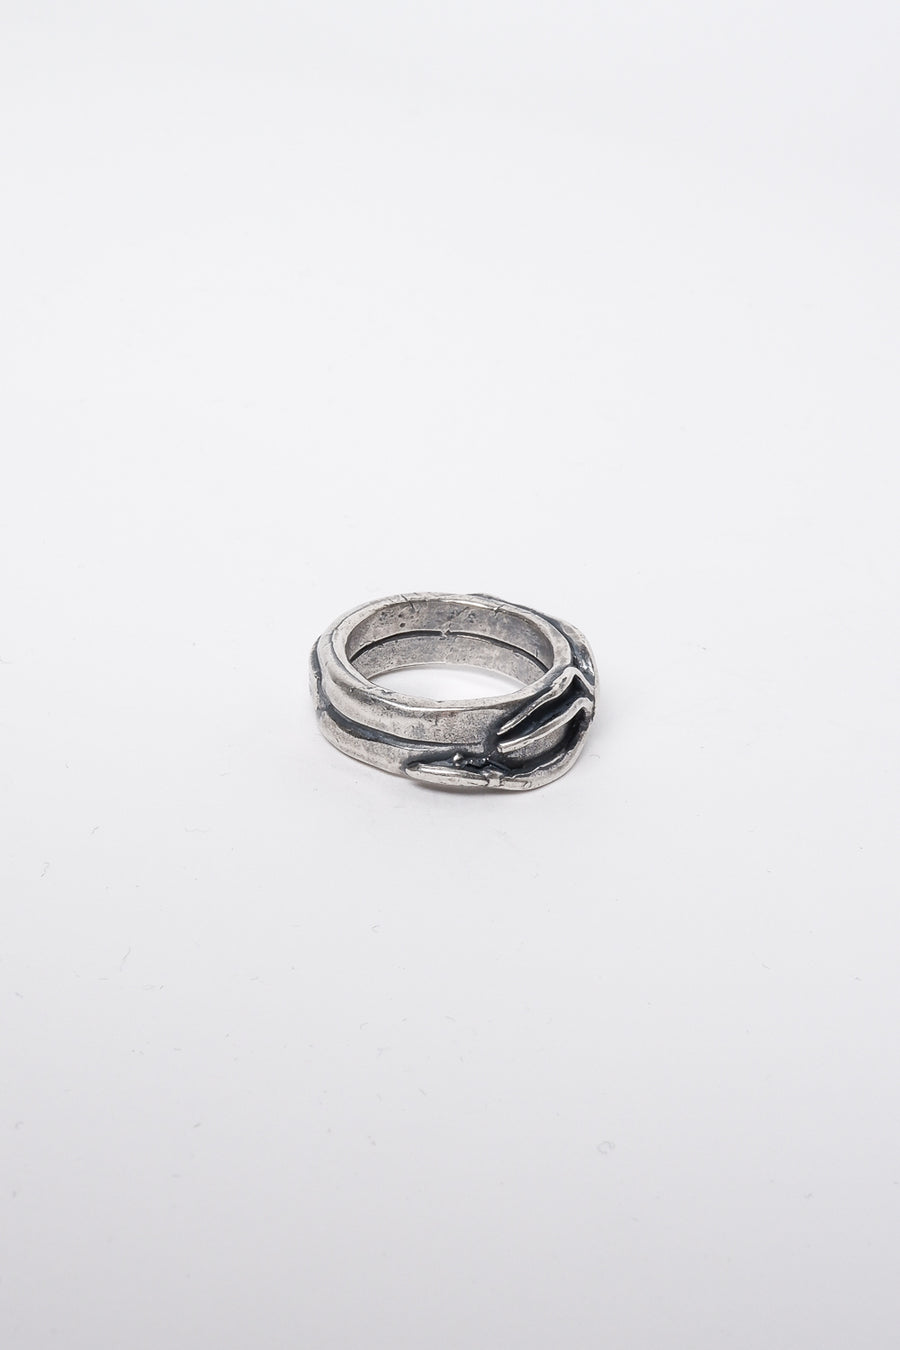 Buy the GOTI AN1056 Ring at Intro. Spend £50 for free UK delivery. Official stockists. We ship worldwide.